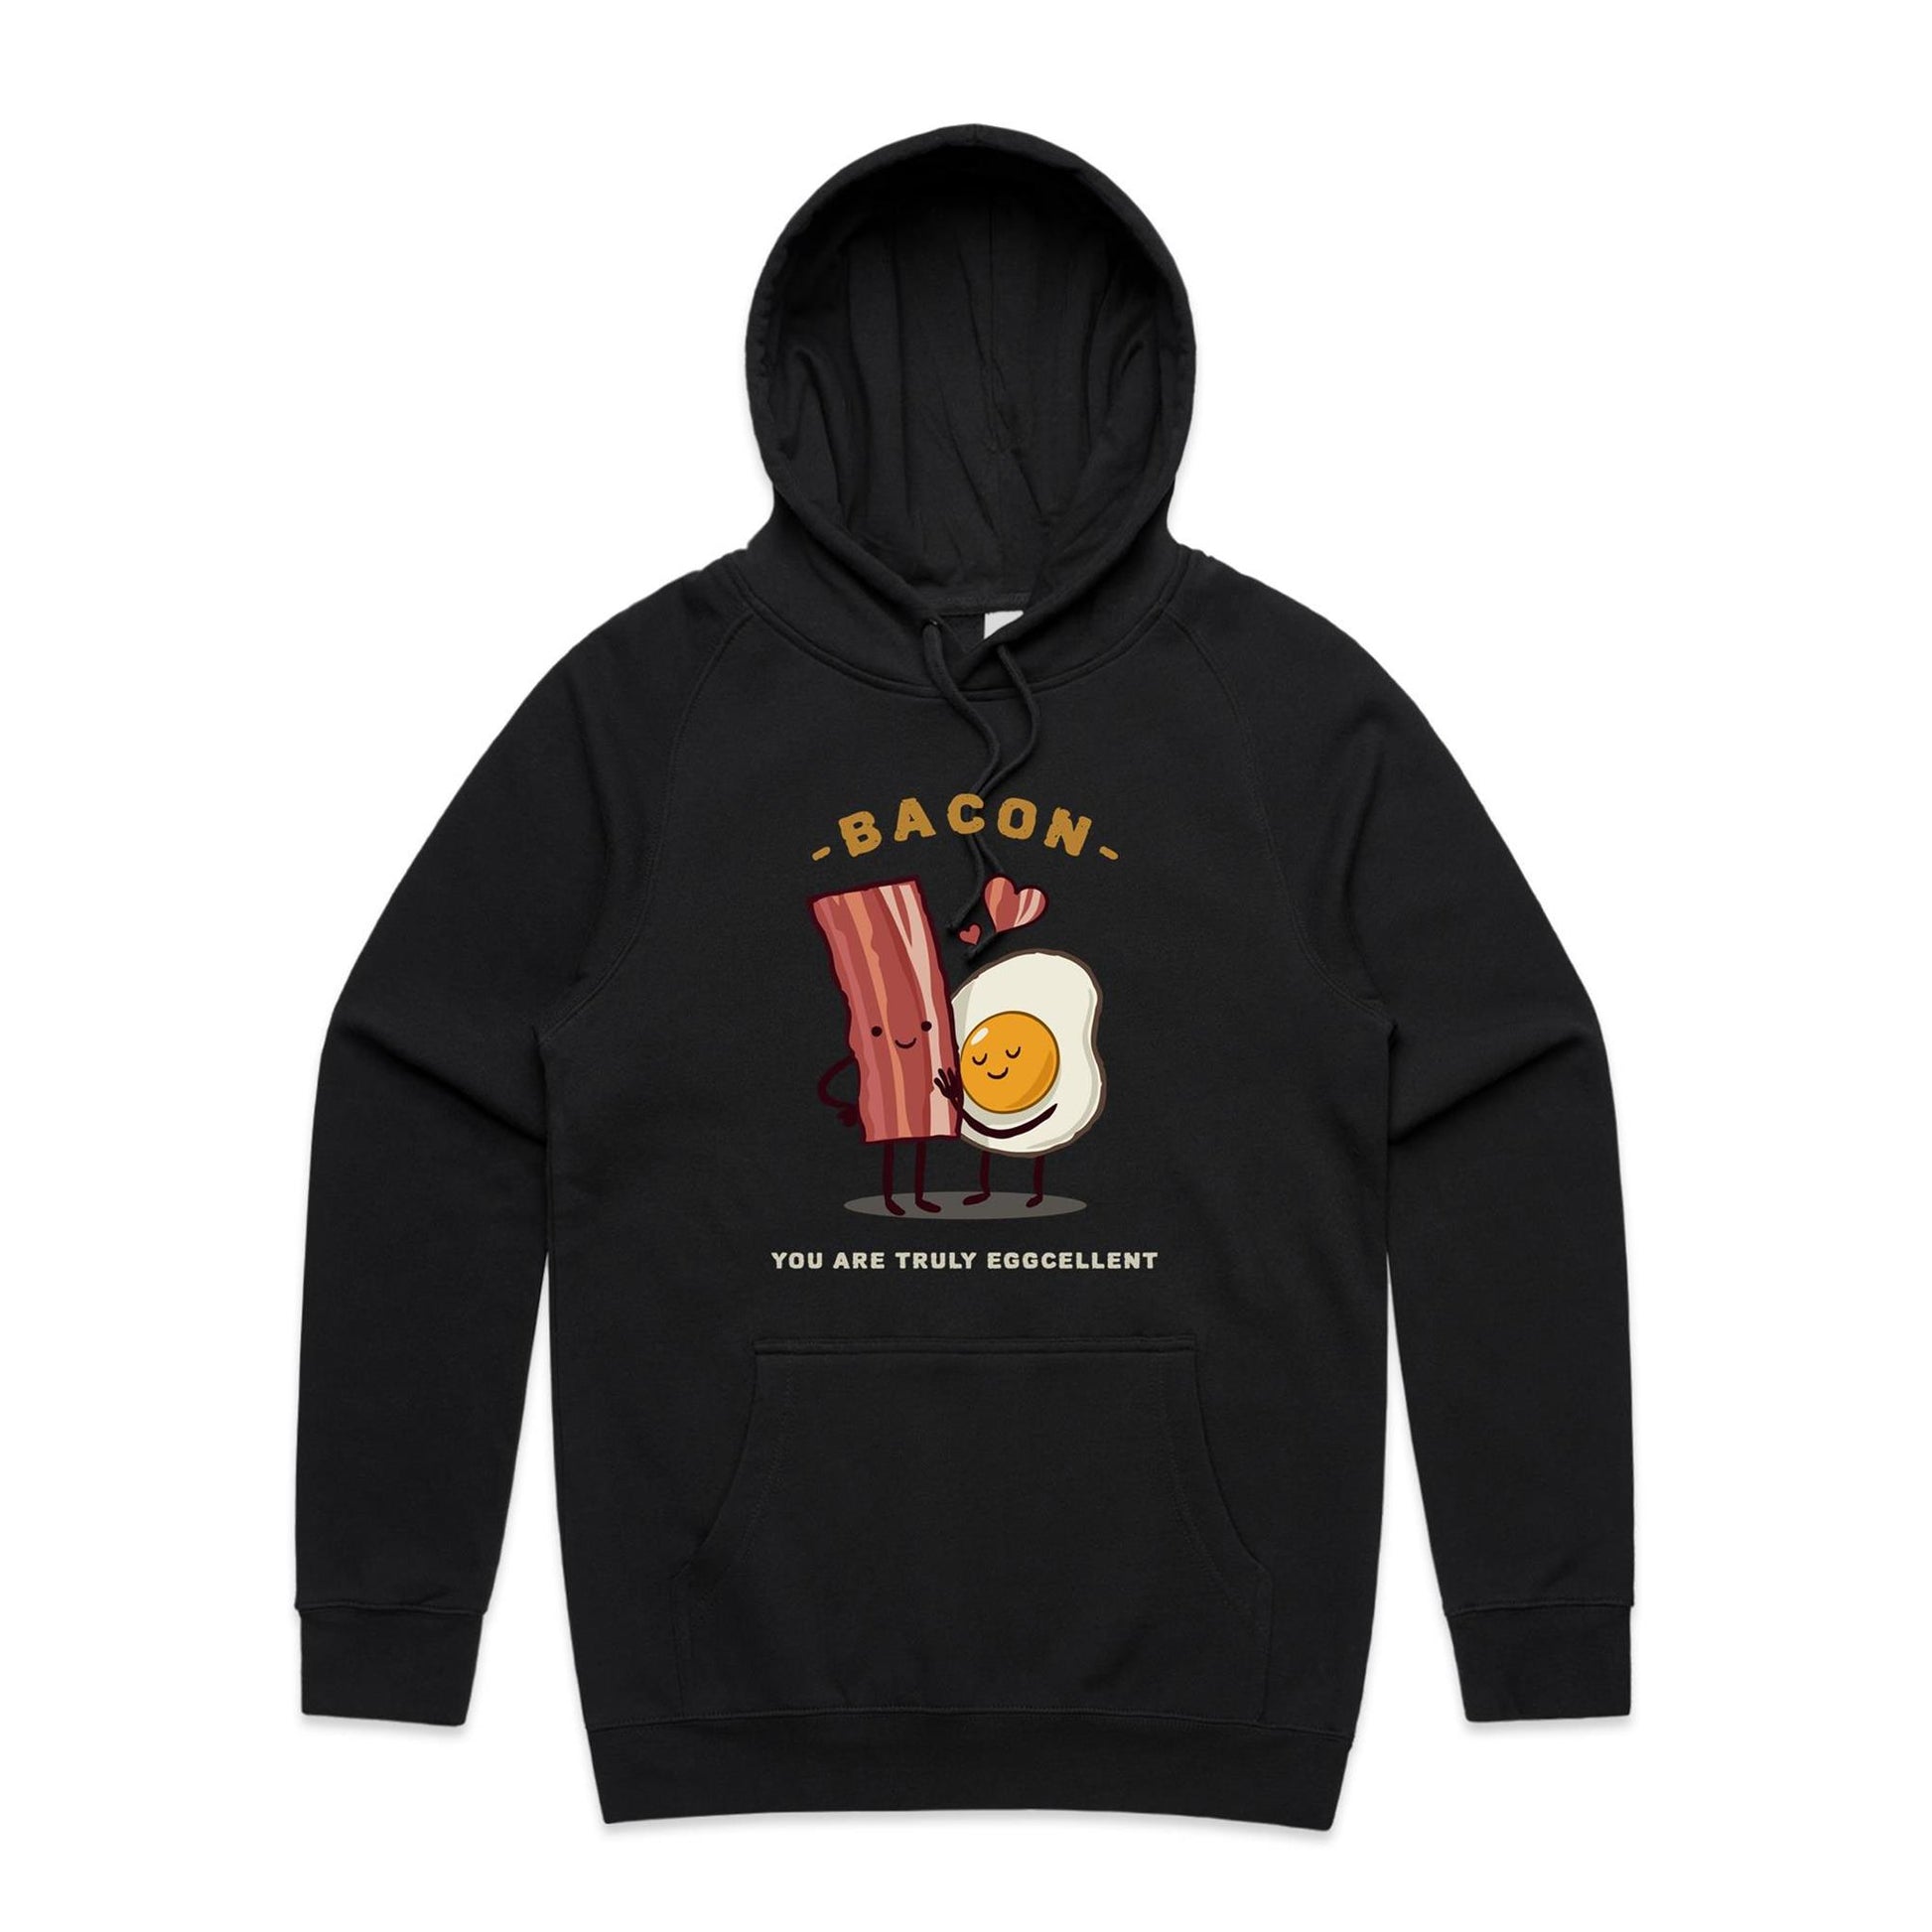 Bacon, You Are Truly Eggcellent - Supply Hood Black Mens Supply Hoodie Food